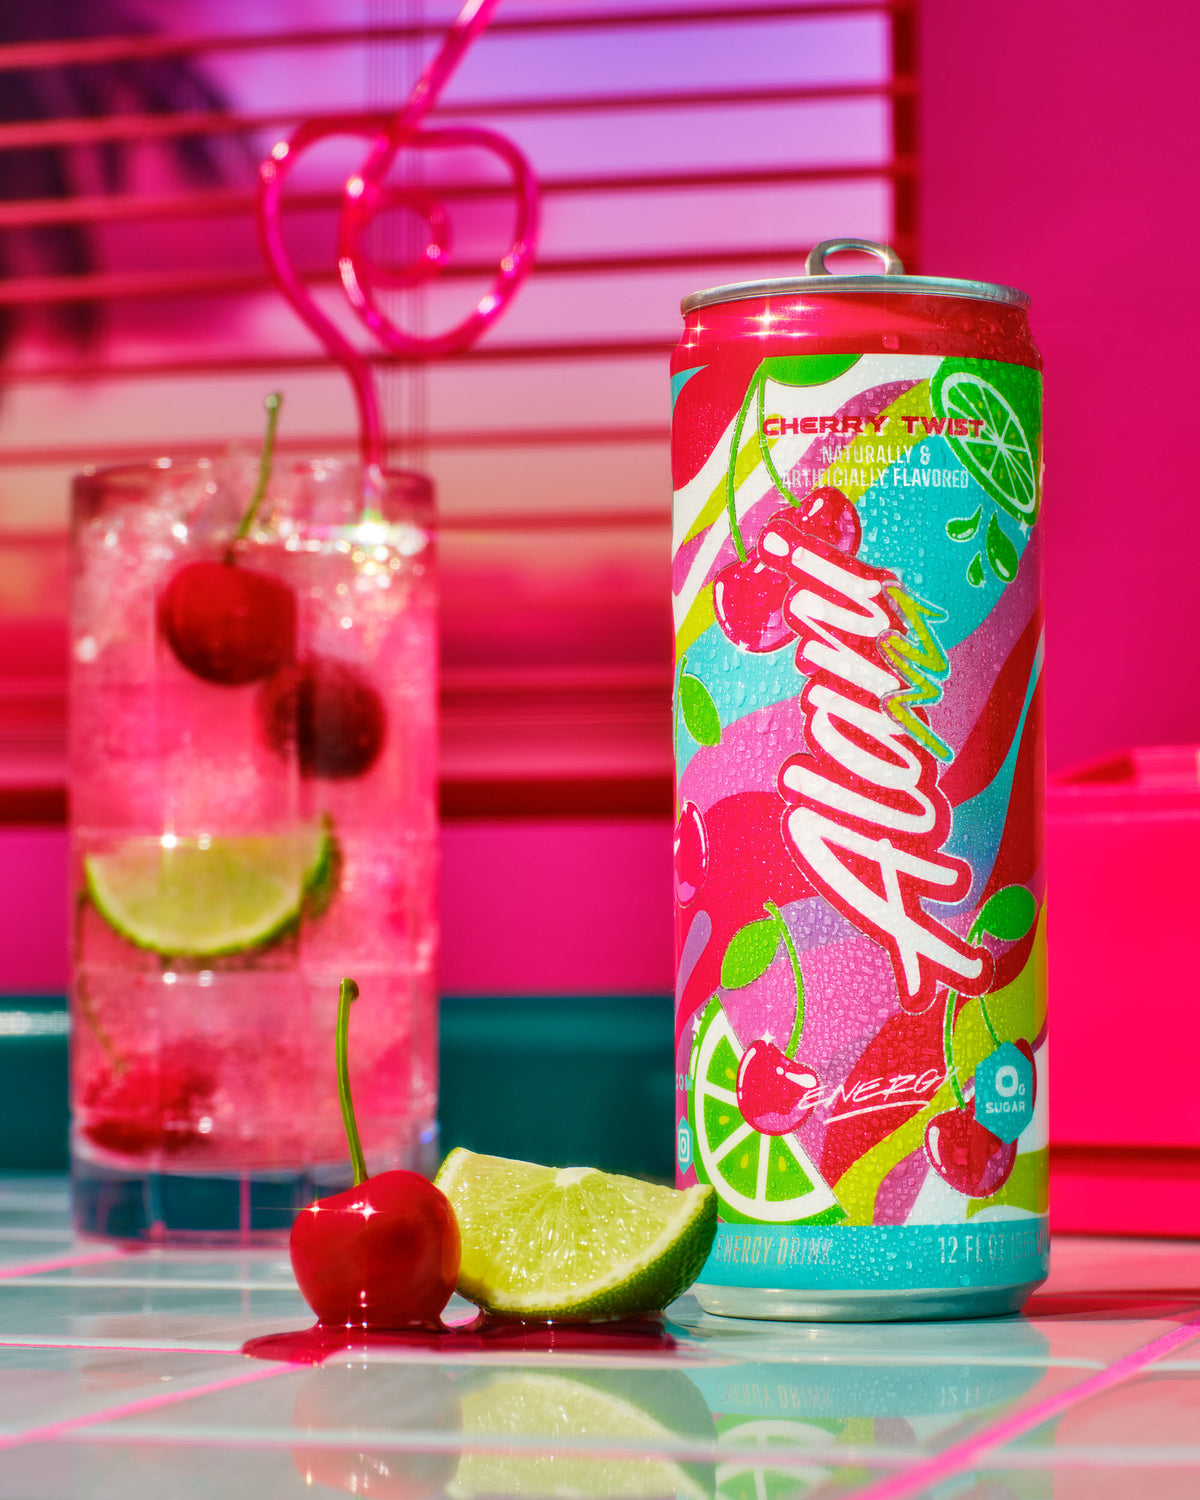 A can of Cherry Twist energy drink is flanked by a cherry-decorated glass of pink soda and fresh lime and cherry on a reflective surface.